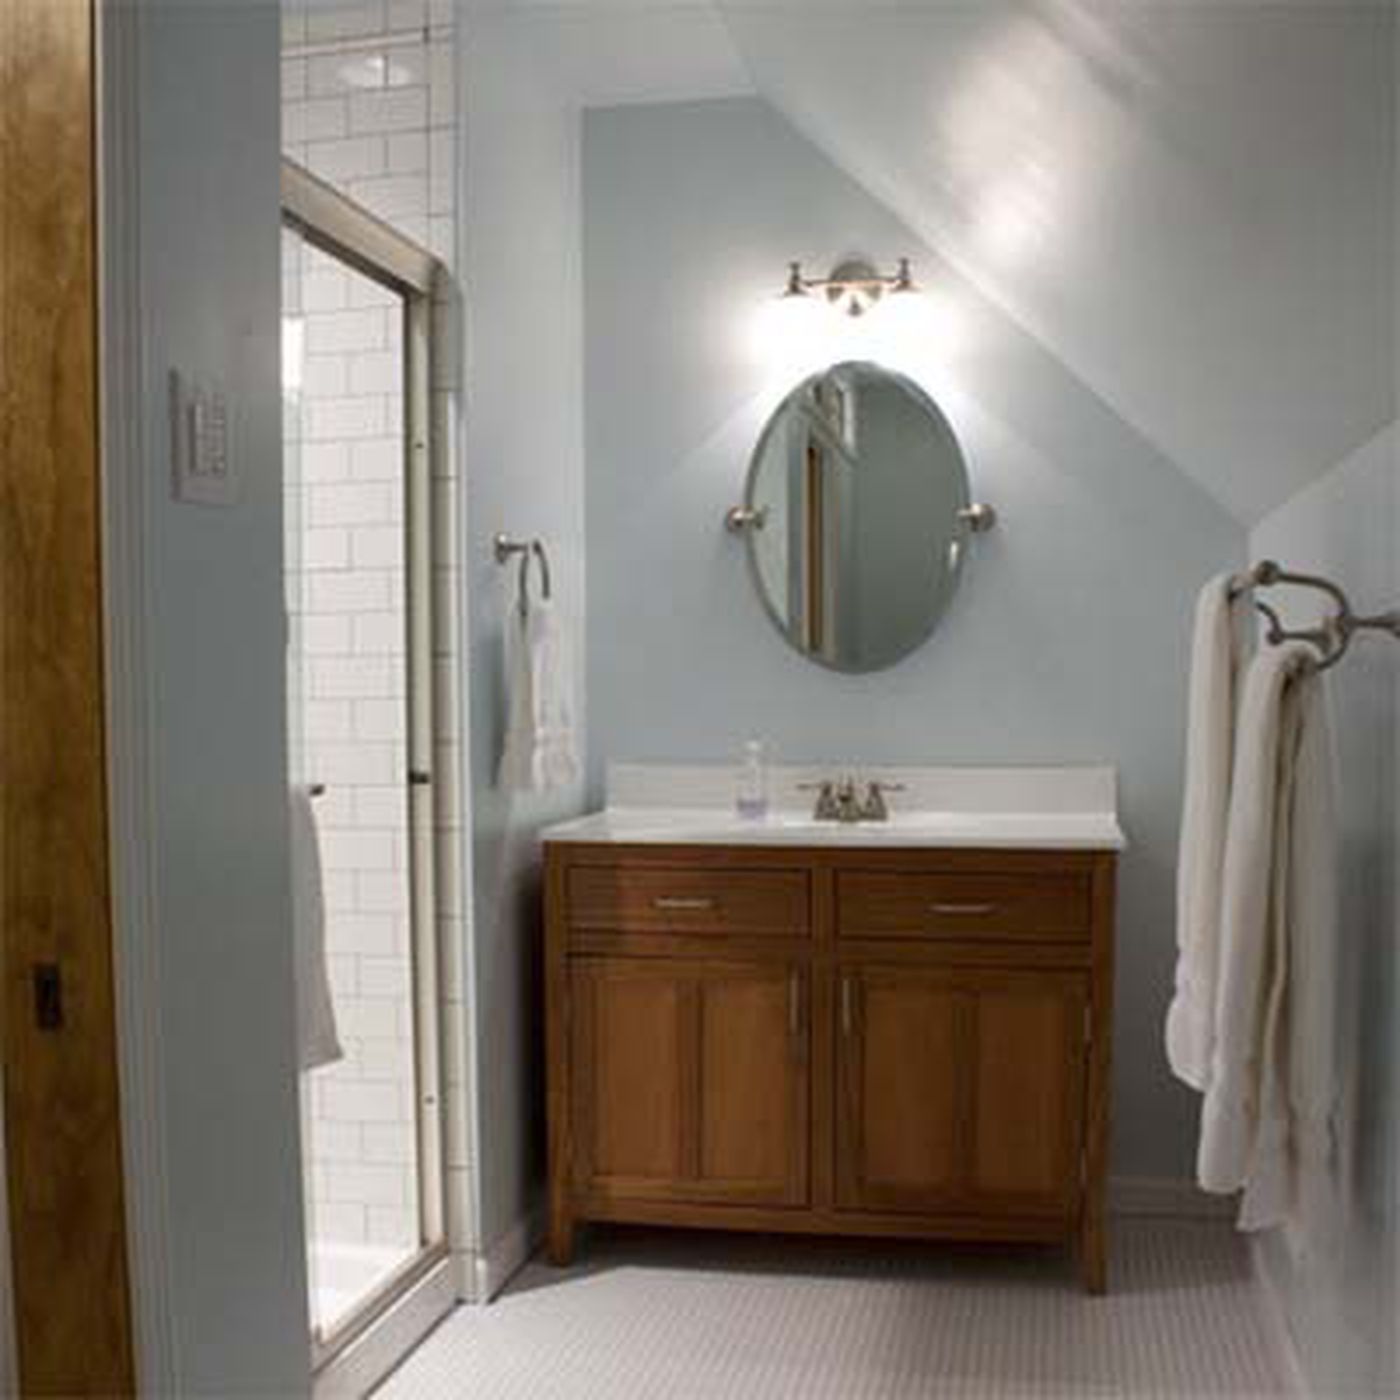 25 Bathroom Decorating Ideas On A Budget This Old House,How To Cook Chicken Of The Woods